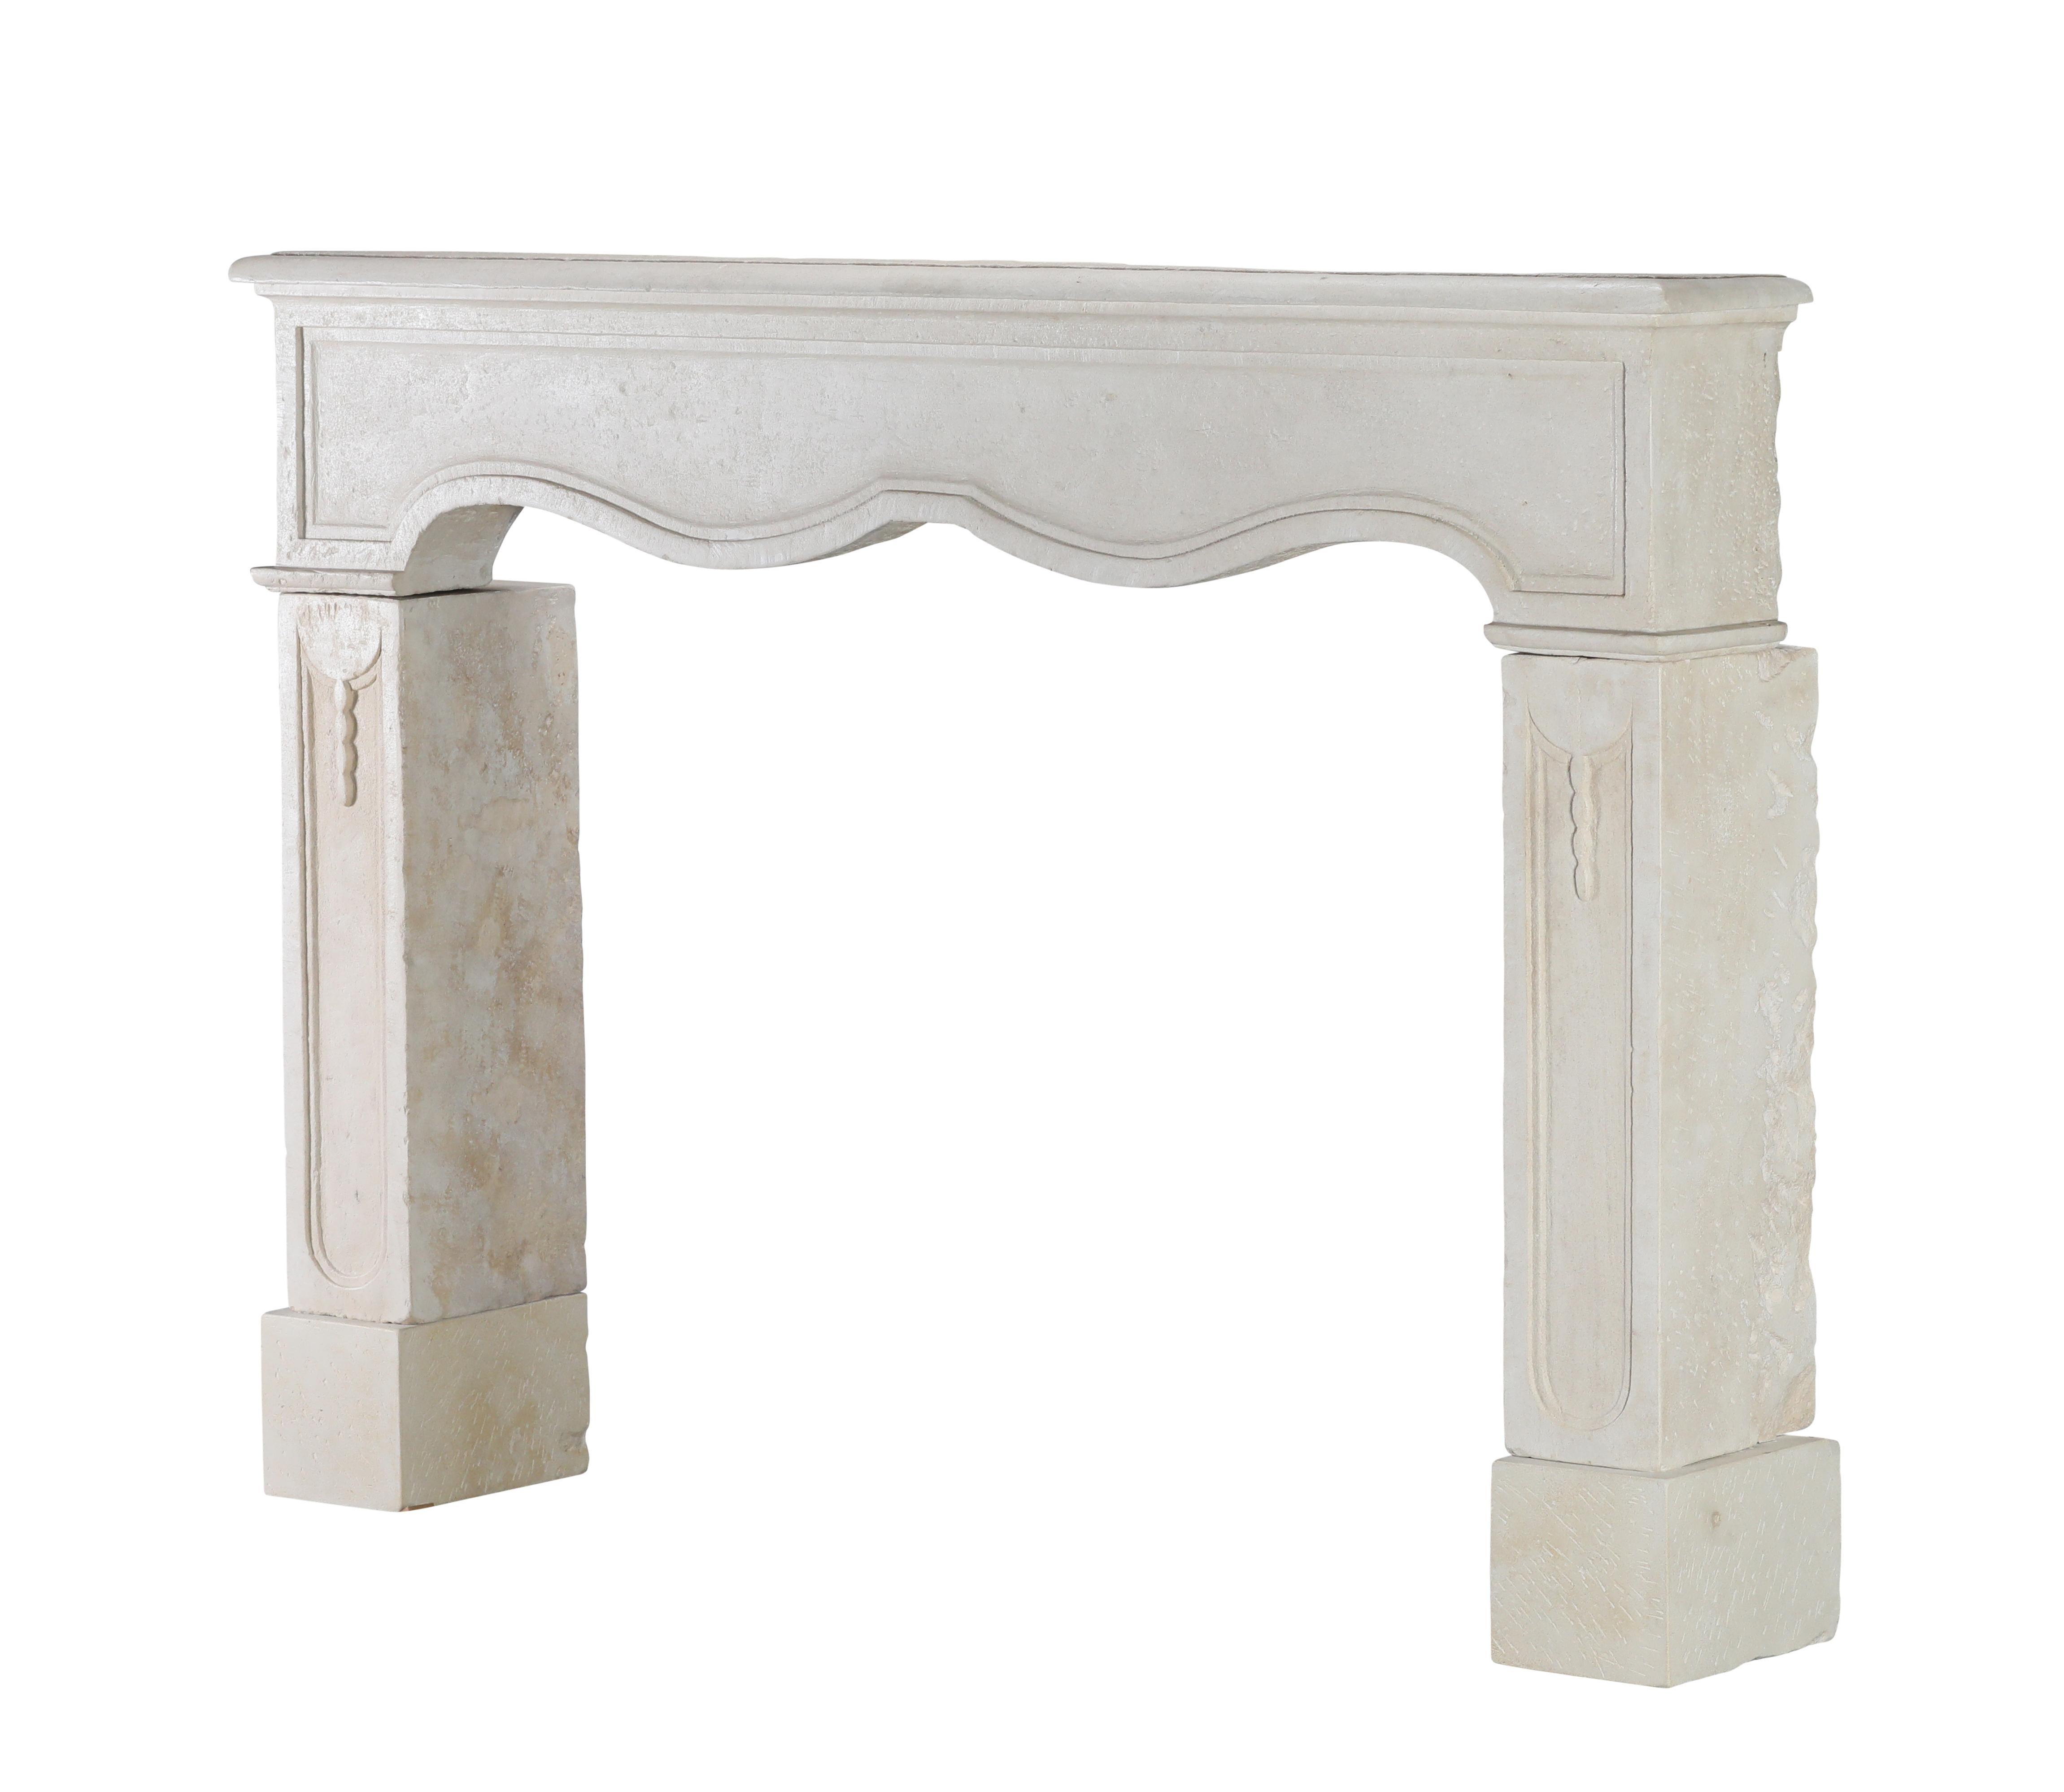 19th Century Reclaimed French Light Stone Fireplace In Timeless Louis XIV Style For Sale